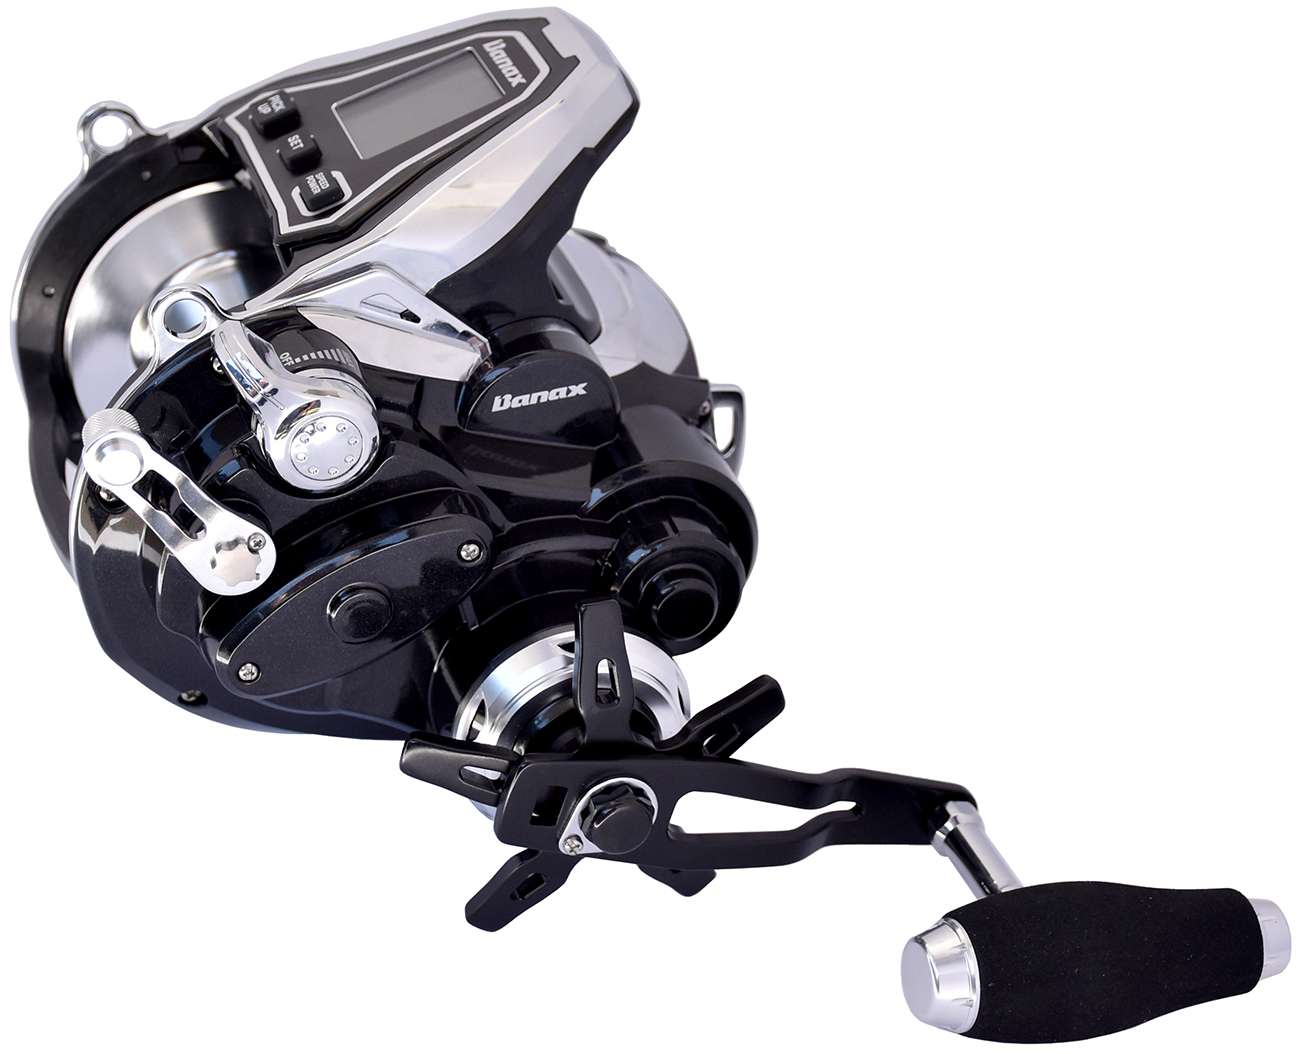 BANAX KAIGEN 150Z 150S Electric Fishing Reel Size 150 Right Hand